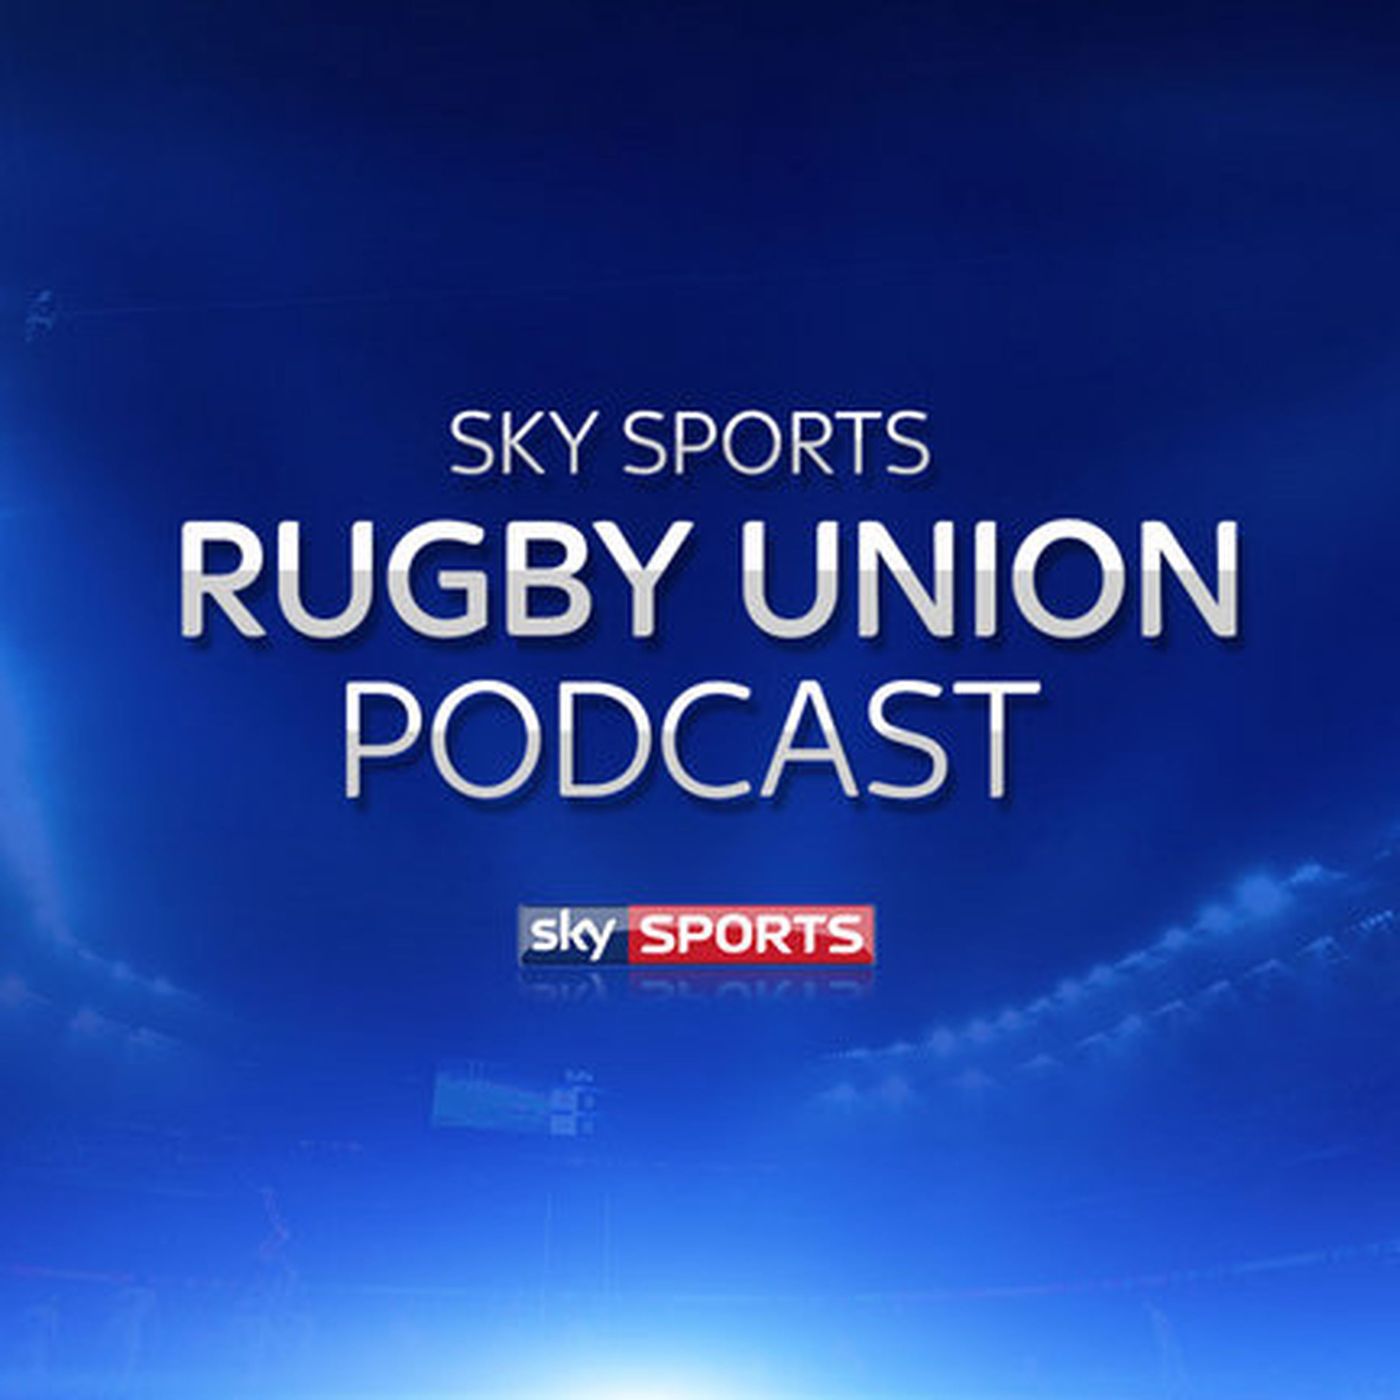 Sky Sports Rugby Union Podcast - 23rd Sept